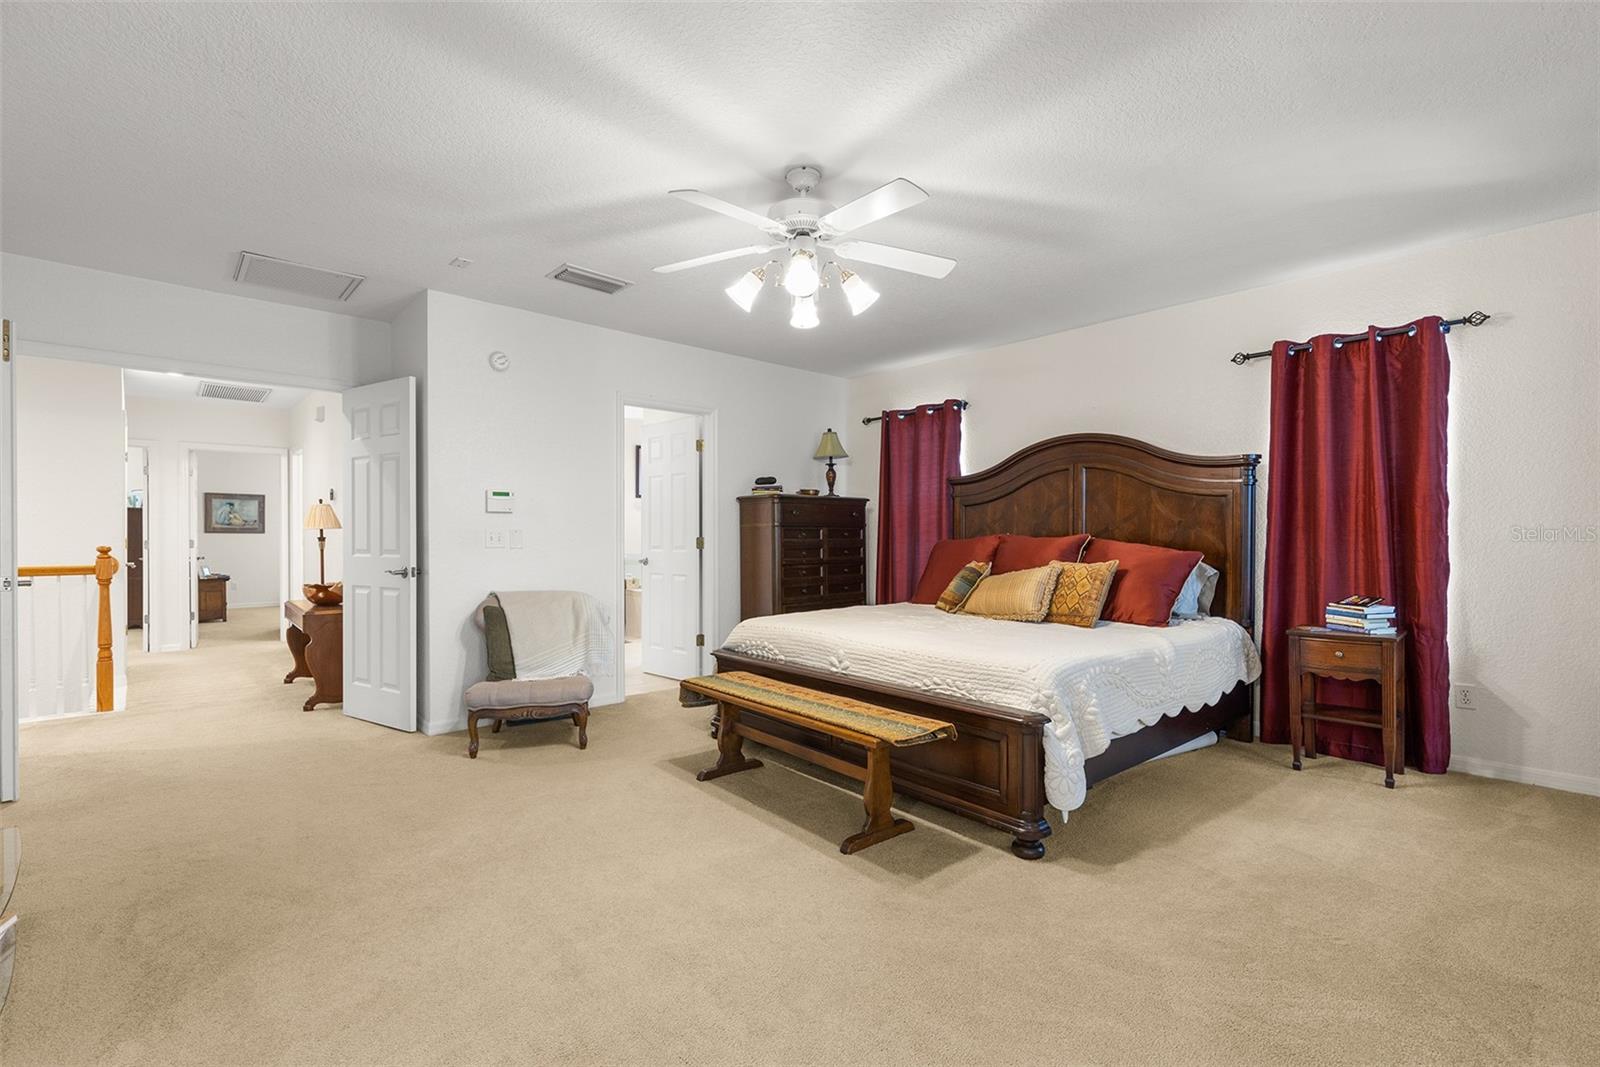 Double doors open to your relaxing Master suite that includes large bathroom, two walk-in closets, sitting space, and a porch